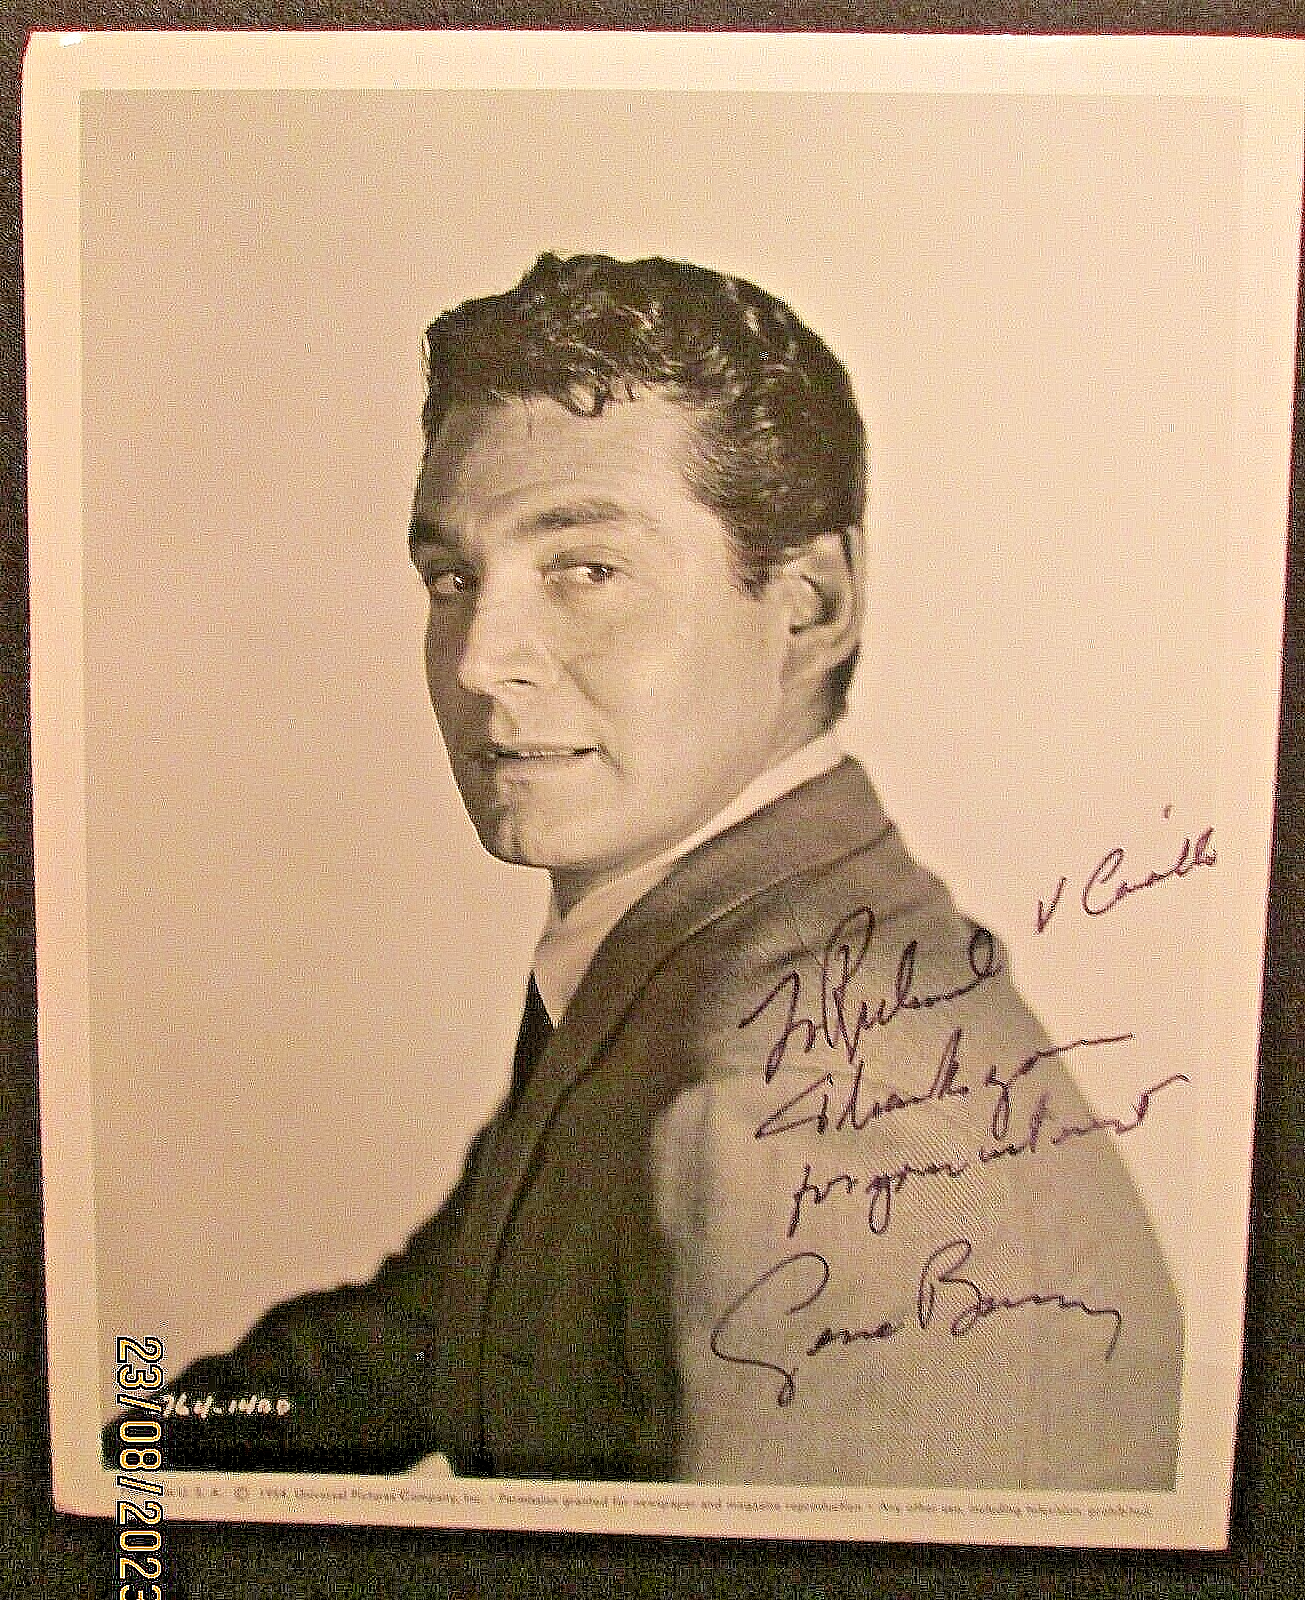 Primary image for GENE BARRY: (BURKE,S LAW) ORIG,HAND SIGN AUTOGRAPH PHOTO (CLASSIC TV)